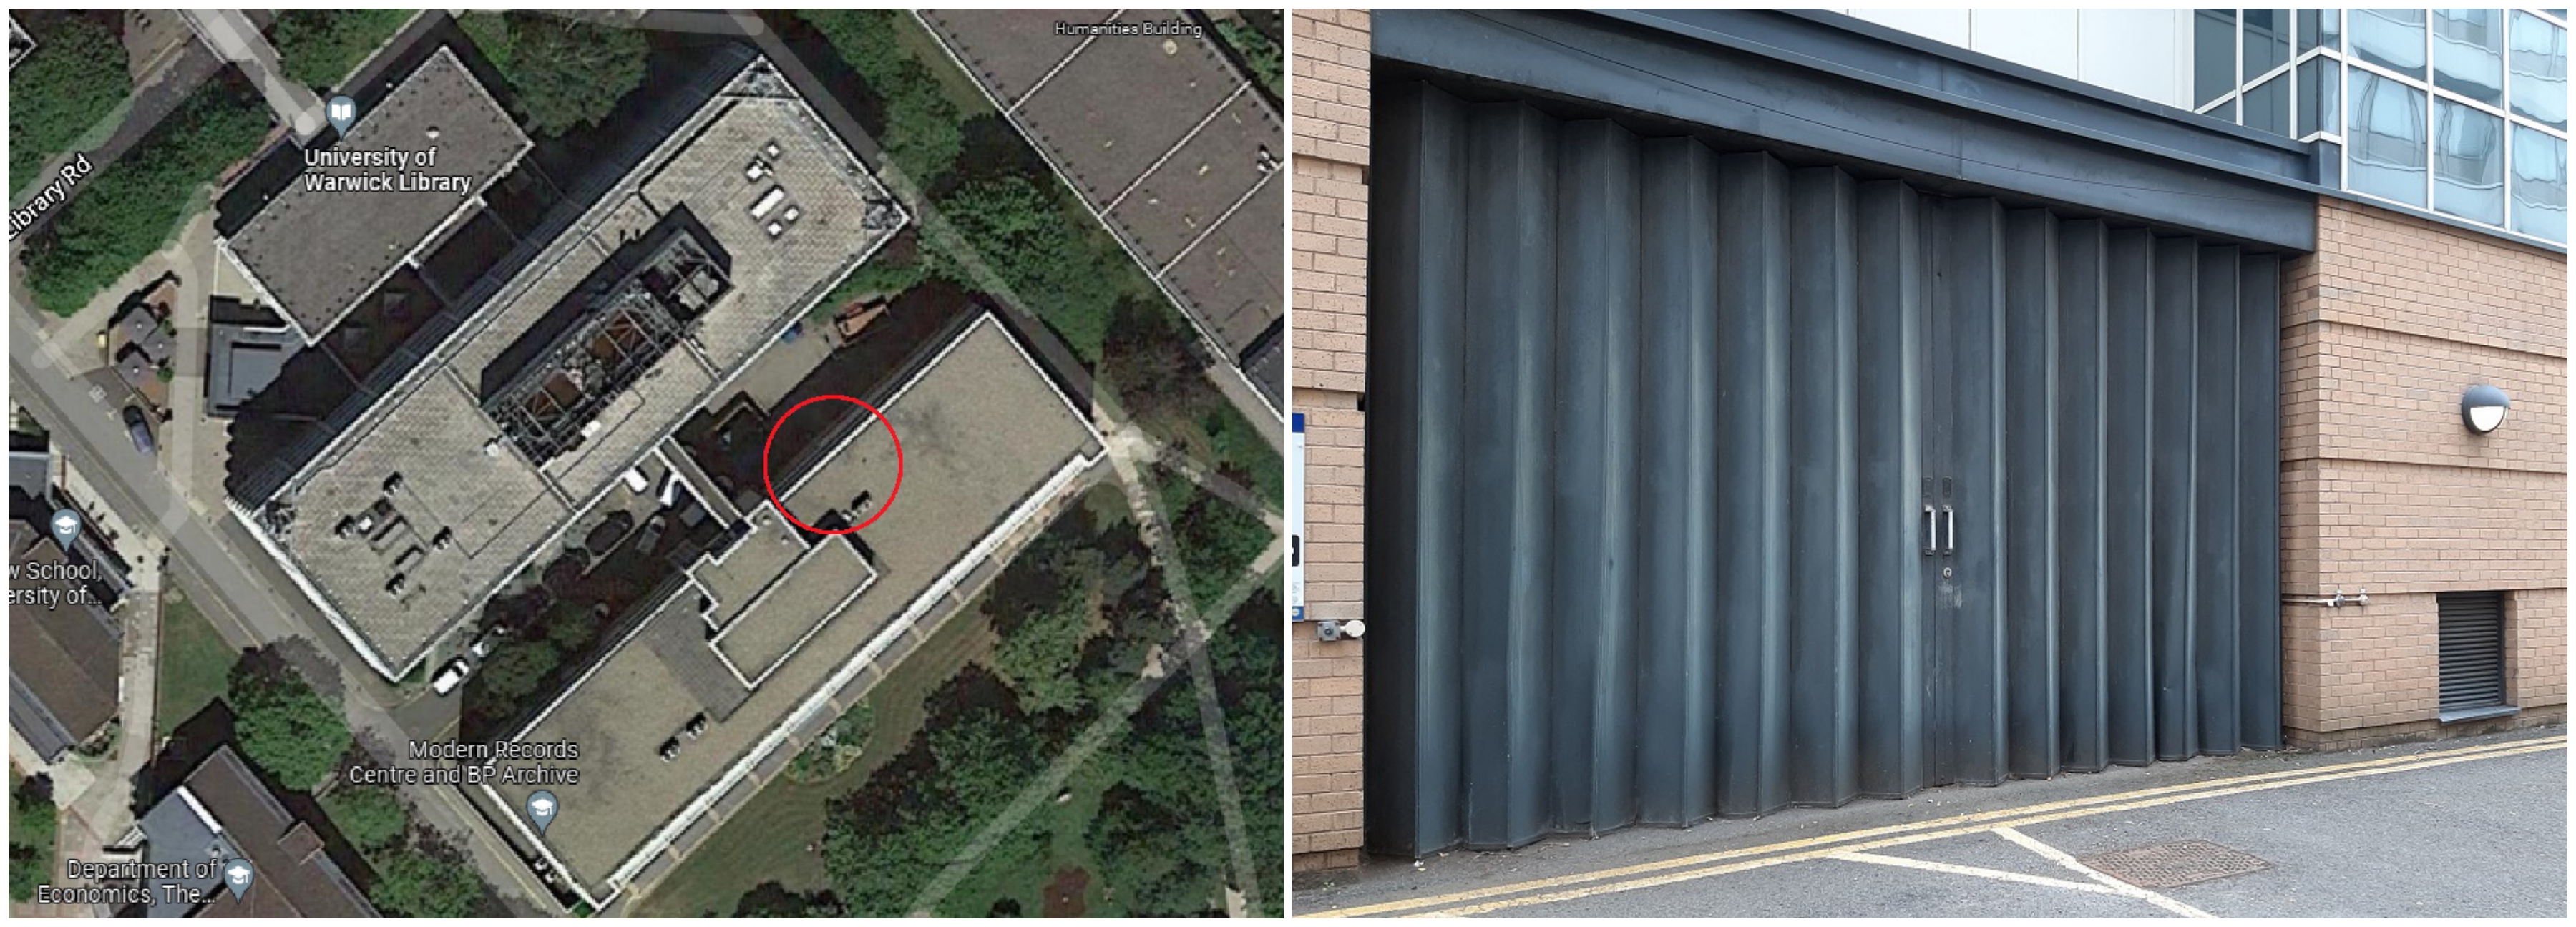 Two images: (1) Google Earth view of the University Library and Modern Records Centre, with the loading bay doors marked with a red circle; (2) photograph of the back of the MRC, showing the loading bay doors